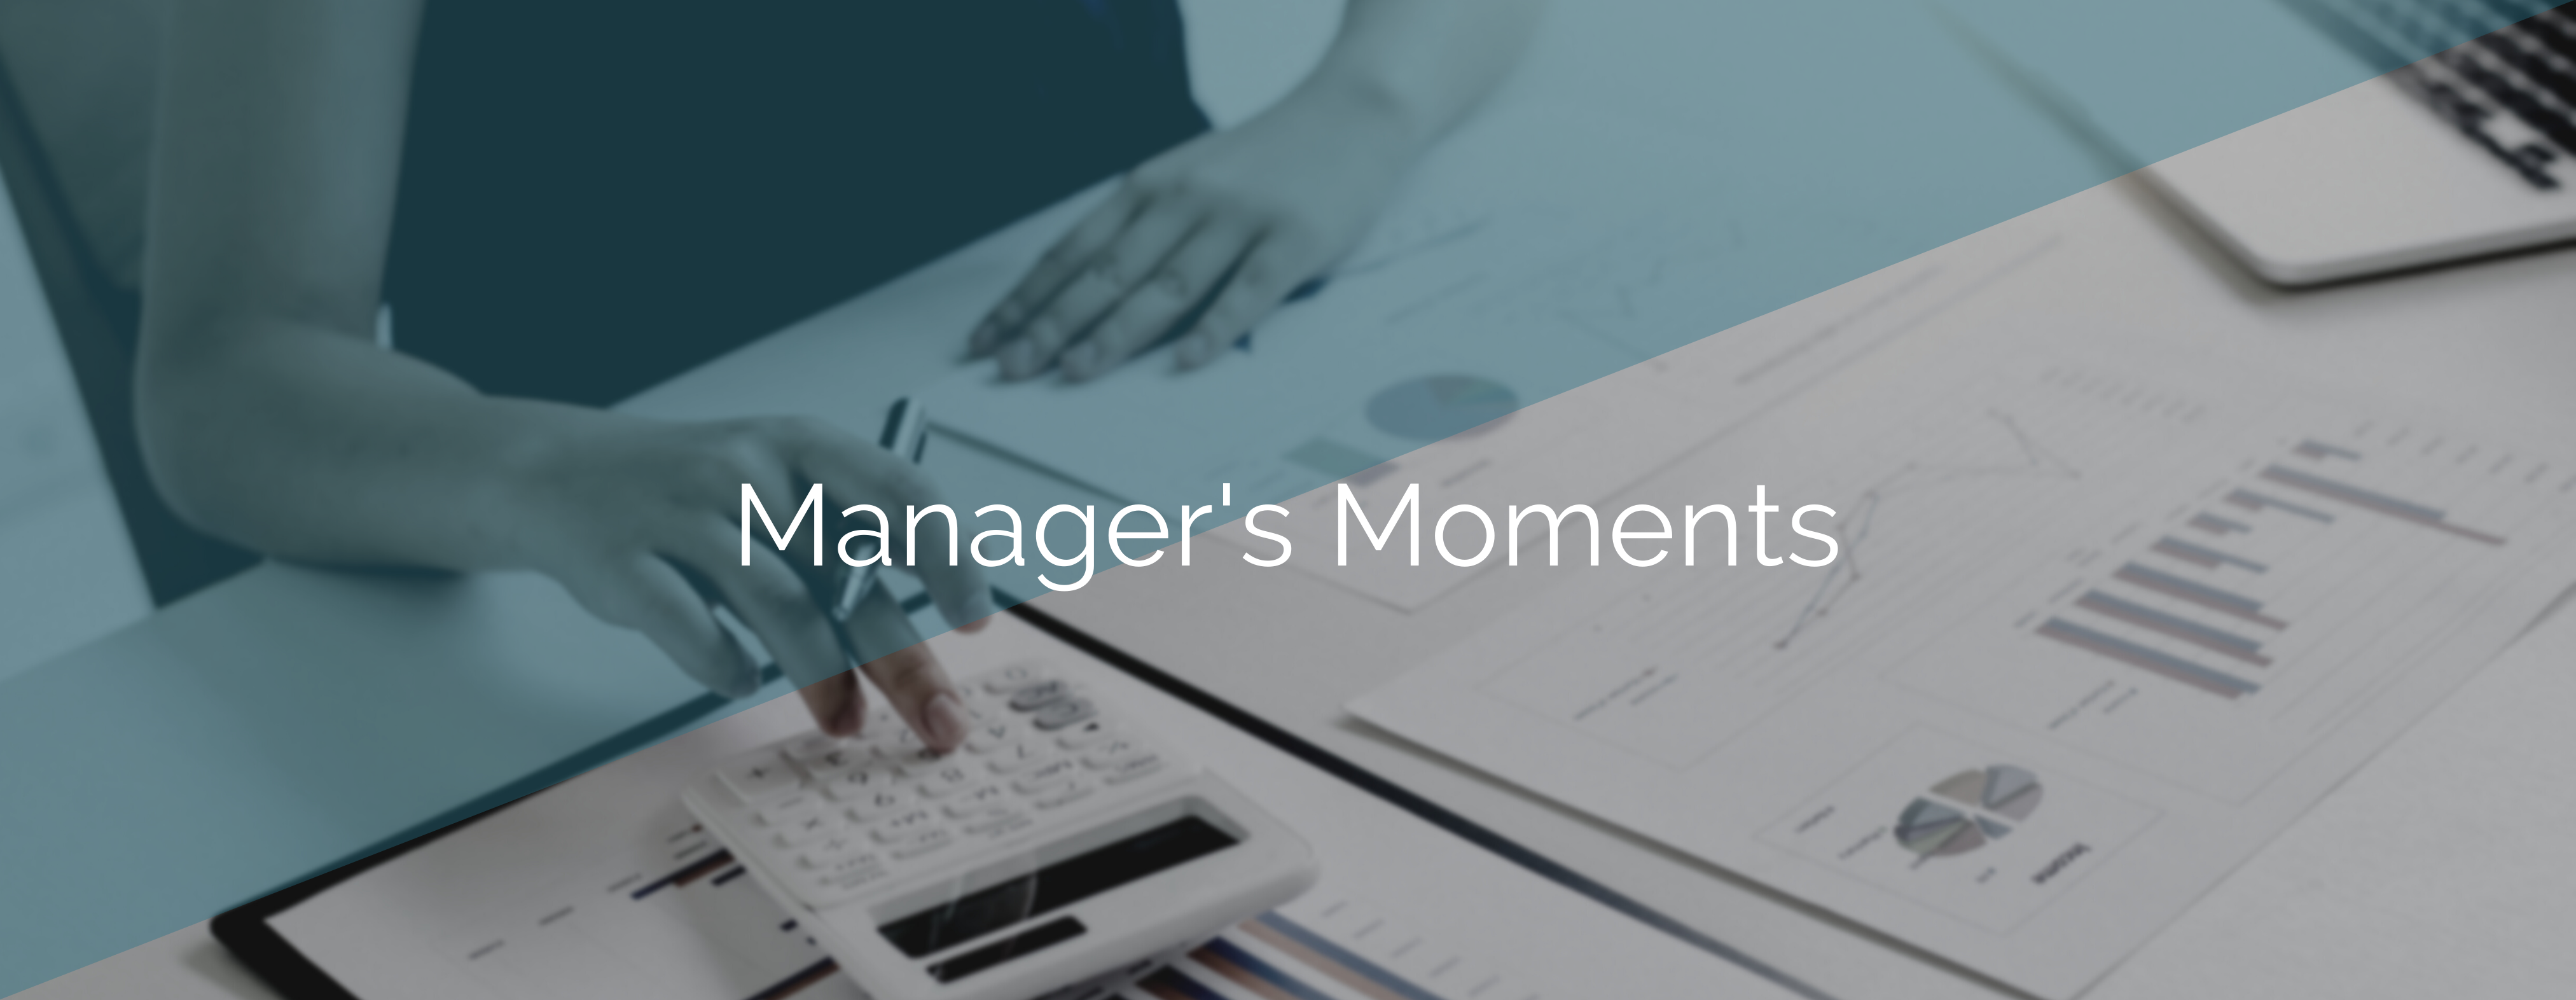 Manager's Moments Header